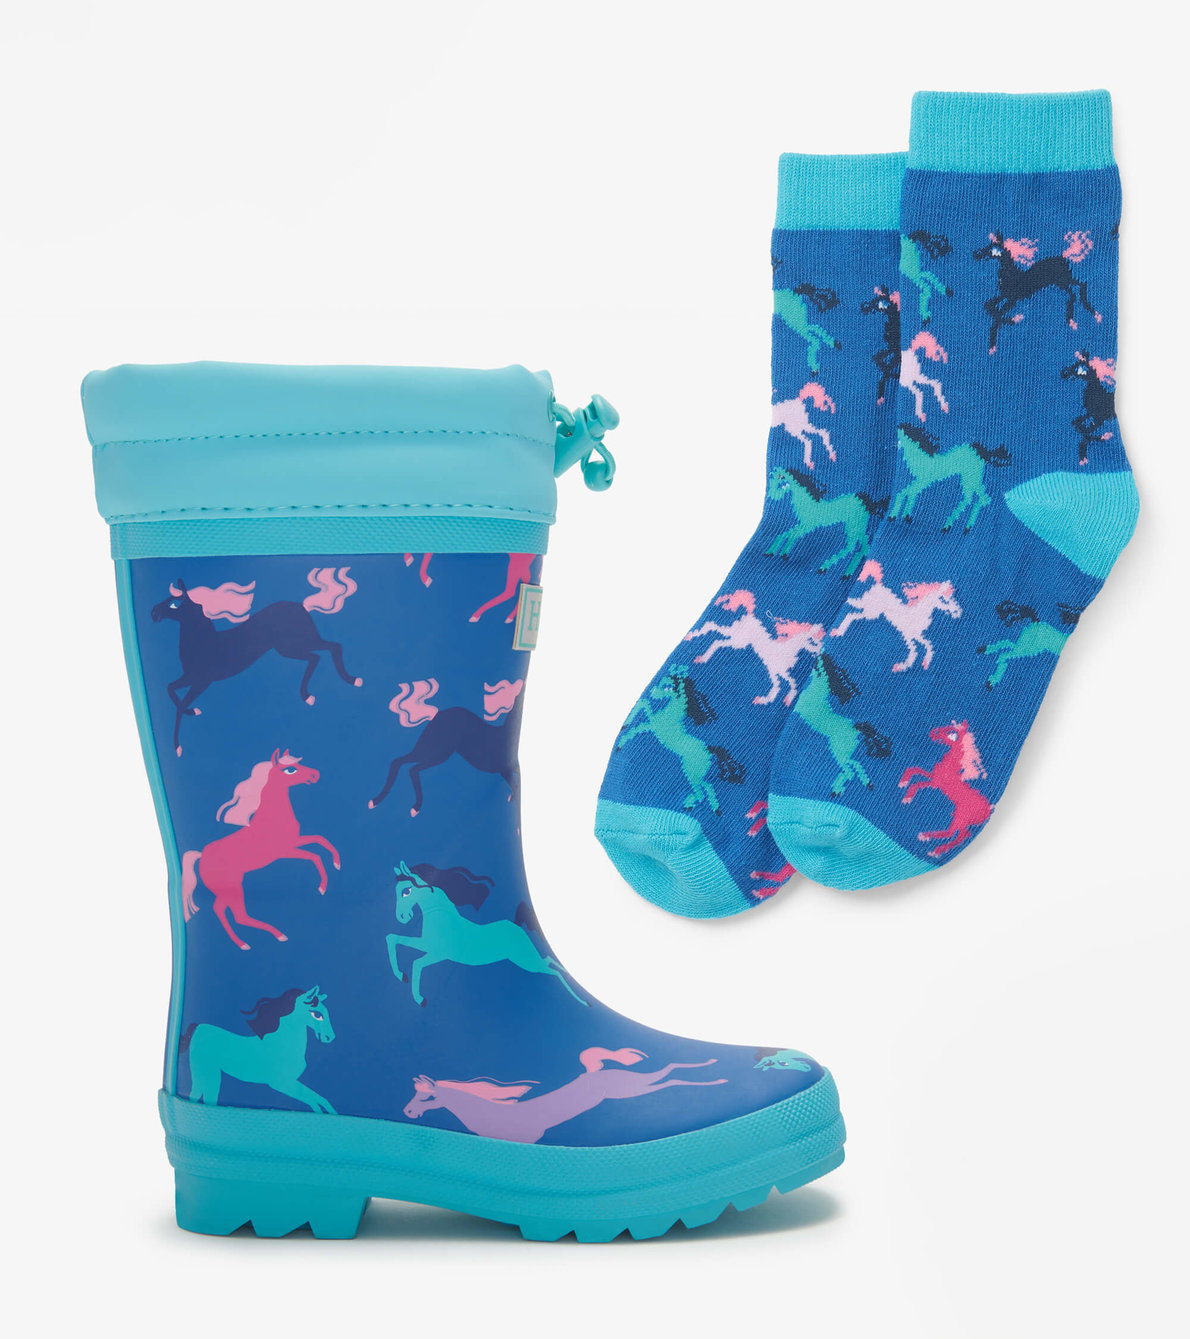 View larger image of Prancing Horses Sherpa Lined Kids Rain Boots